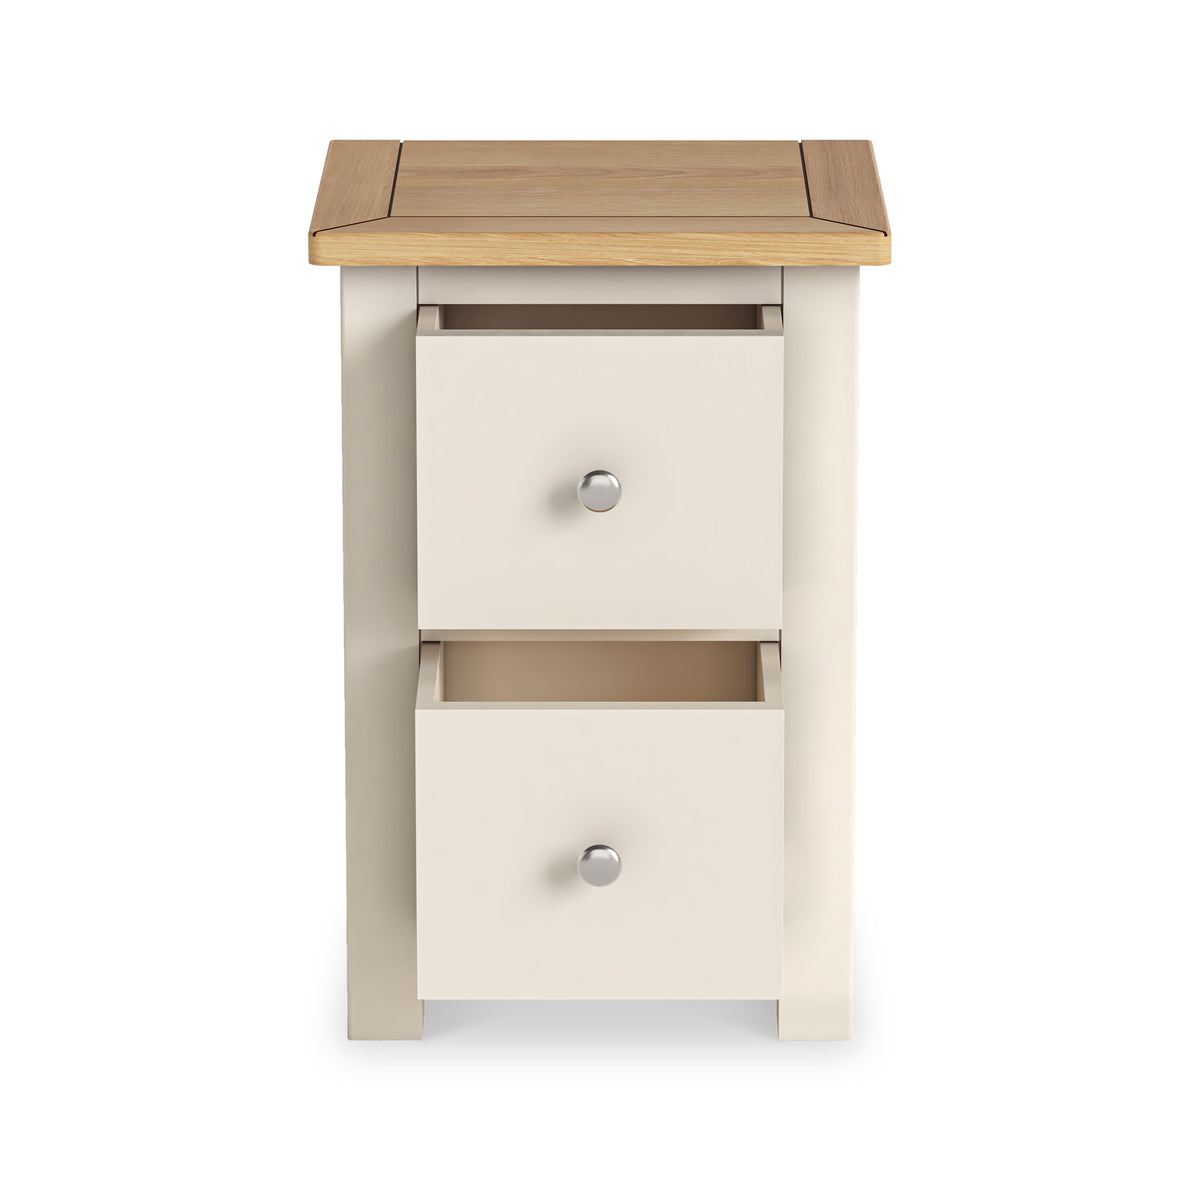 Duchy Linen Cream 2 Drawer Bedside Table with Oak Top